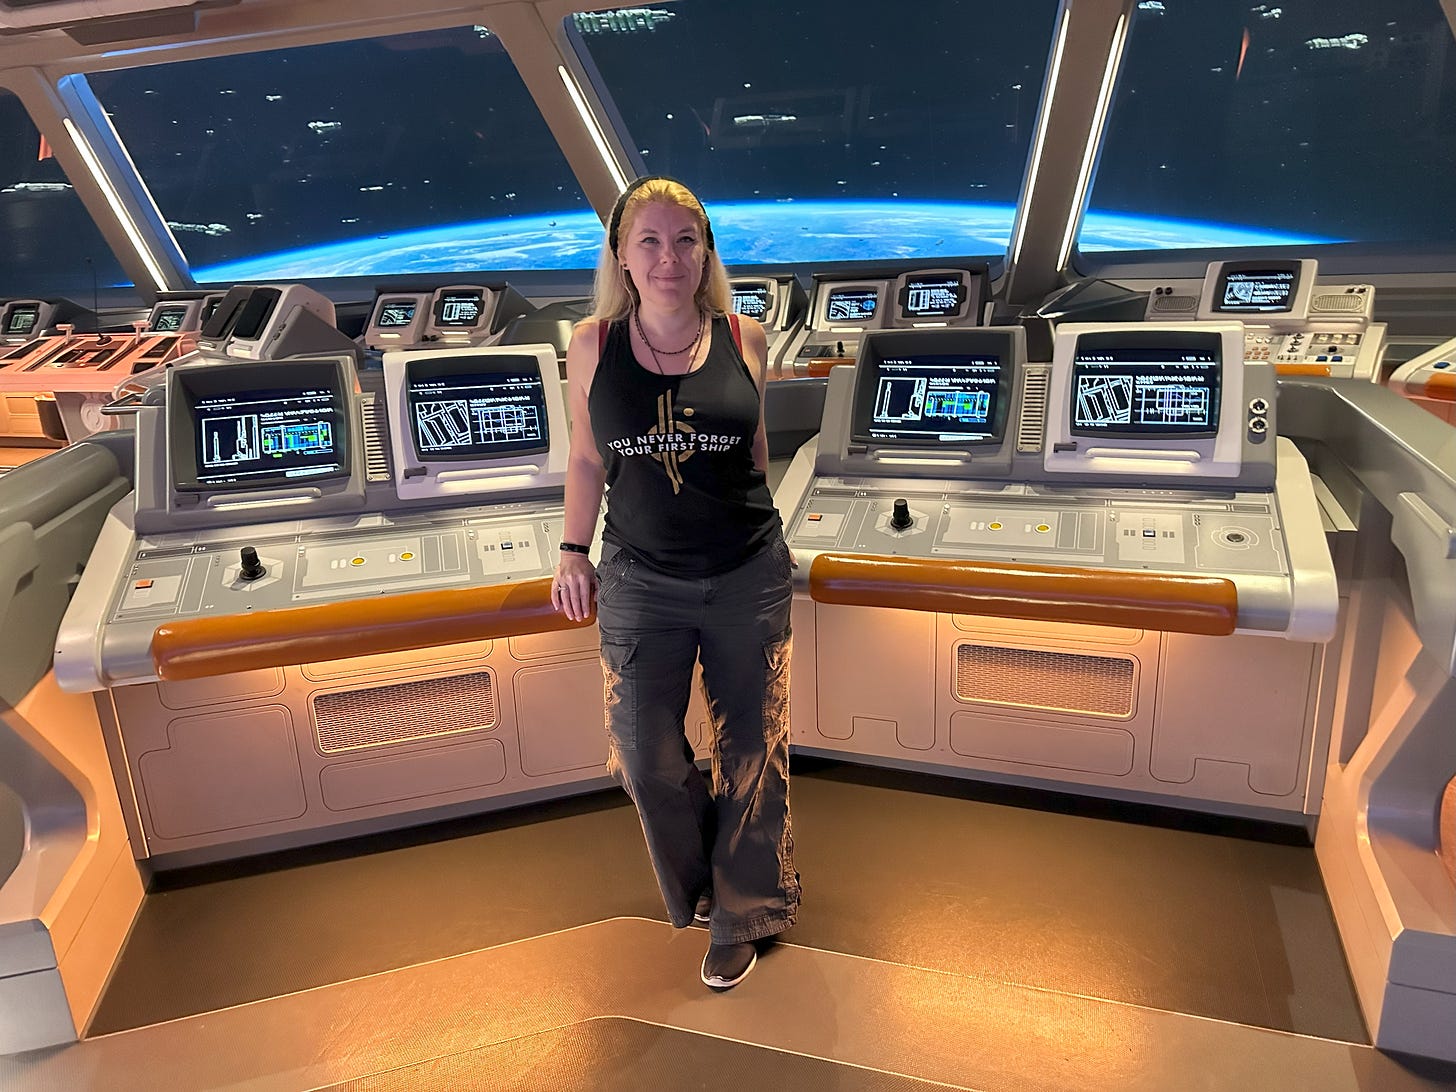 Blonde woman standing on the bridge of the Halcyon Starcruiser, in front of banks of consoles. The windows behind her show the planet Chandrila and a number of spacecraft crusing above it. She wears dark cargo pants and a shirt reading "You never forget your first ship" imposed above the Chandrila Star Line logo.